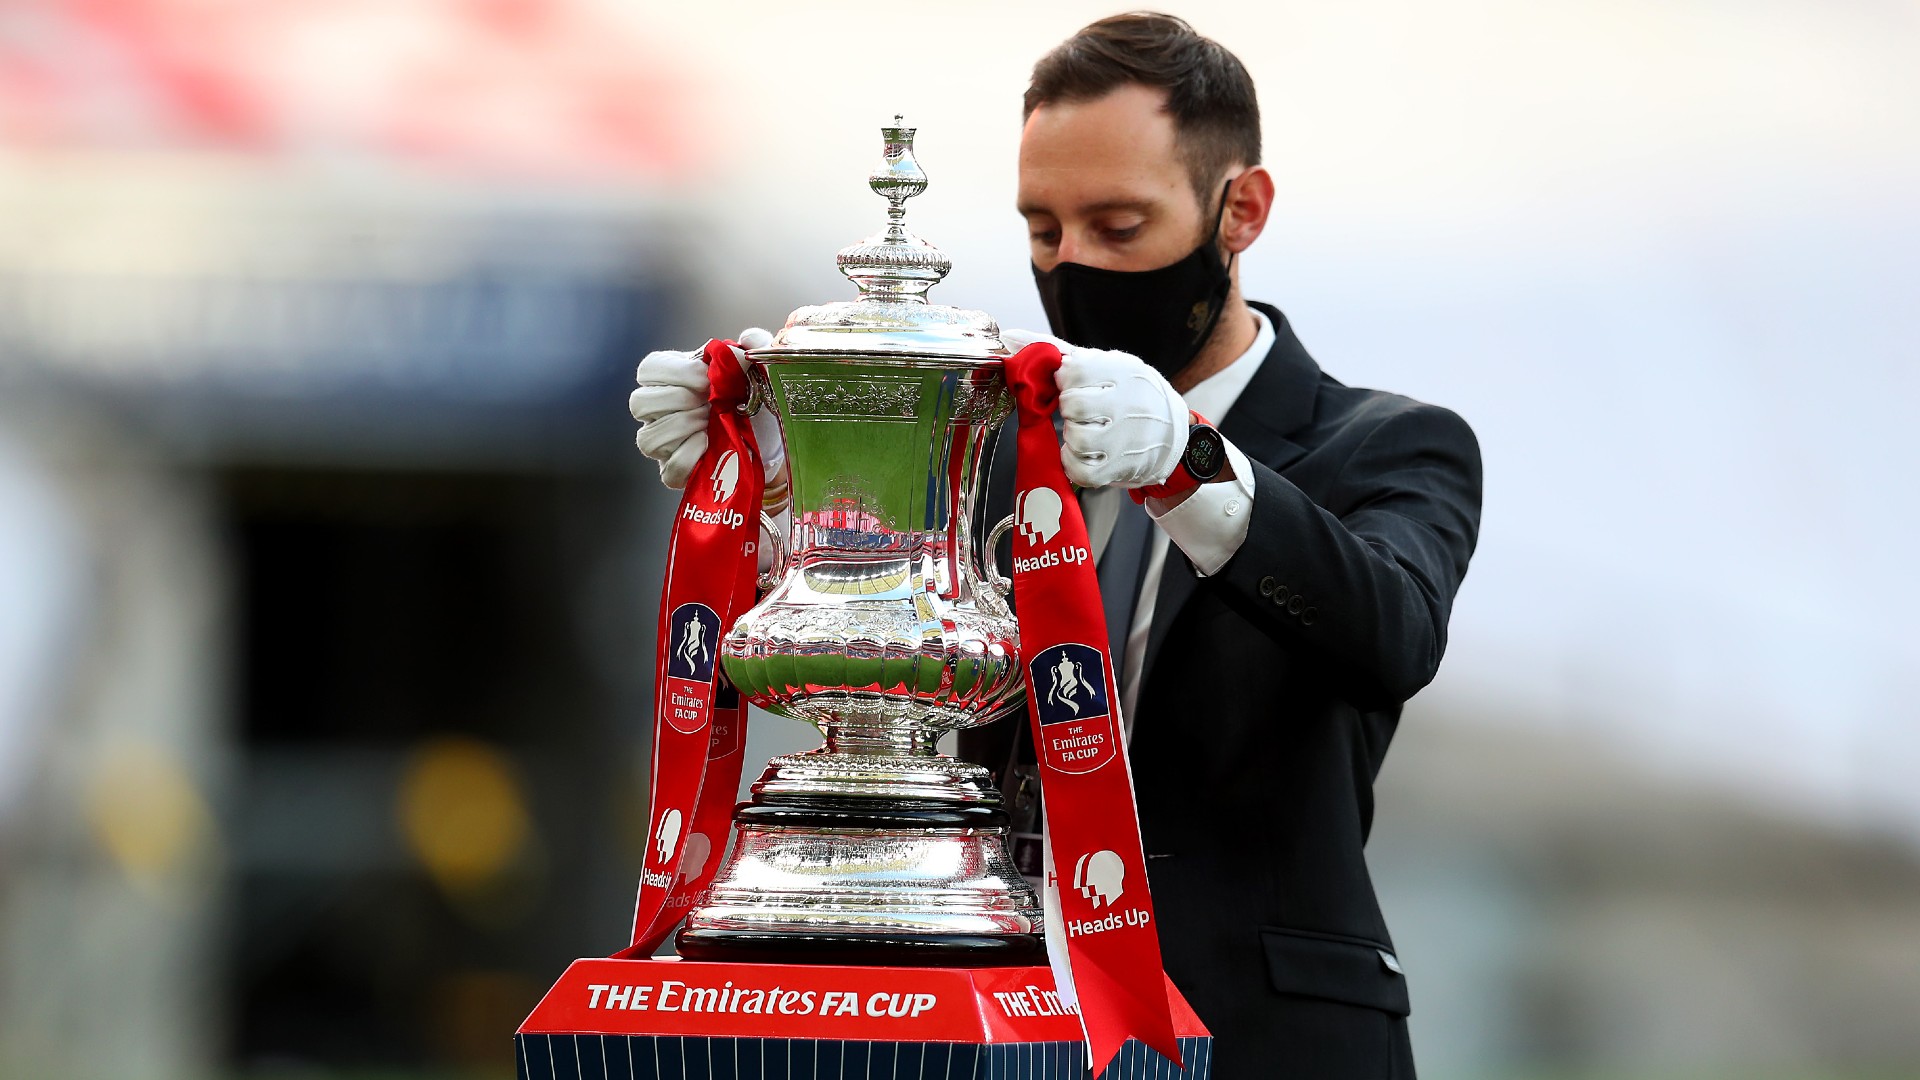 FA Cup Quarter-final draw: The Emirates FA Cup quarter-final fixtures have been drawn with favourable fixtures for Man City, Liverpool and Chelsea